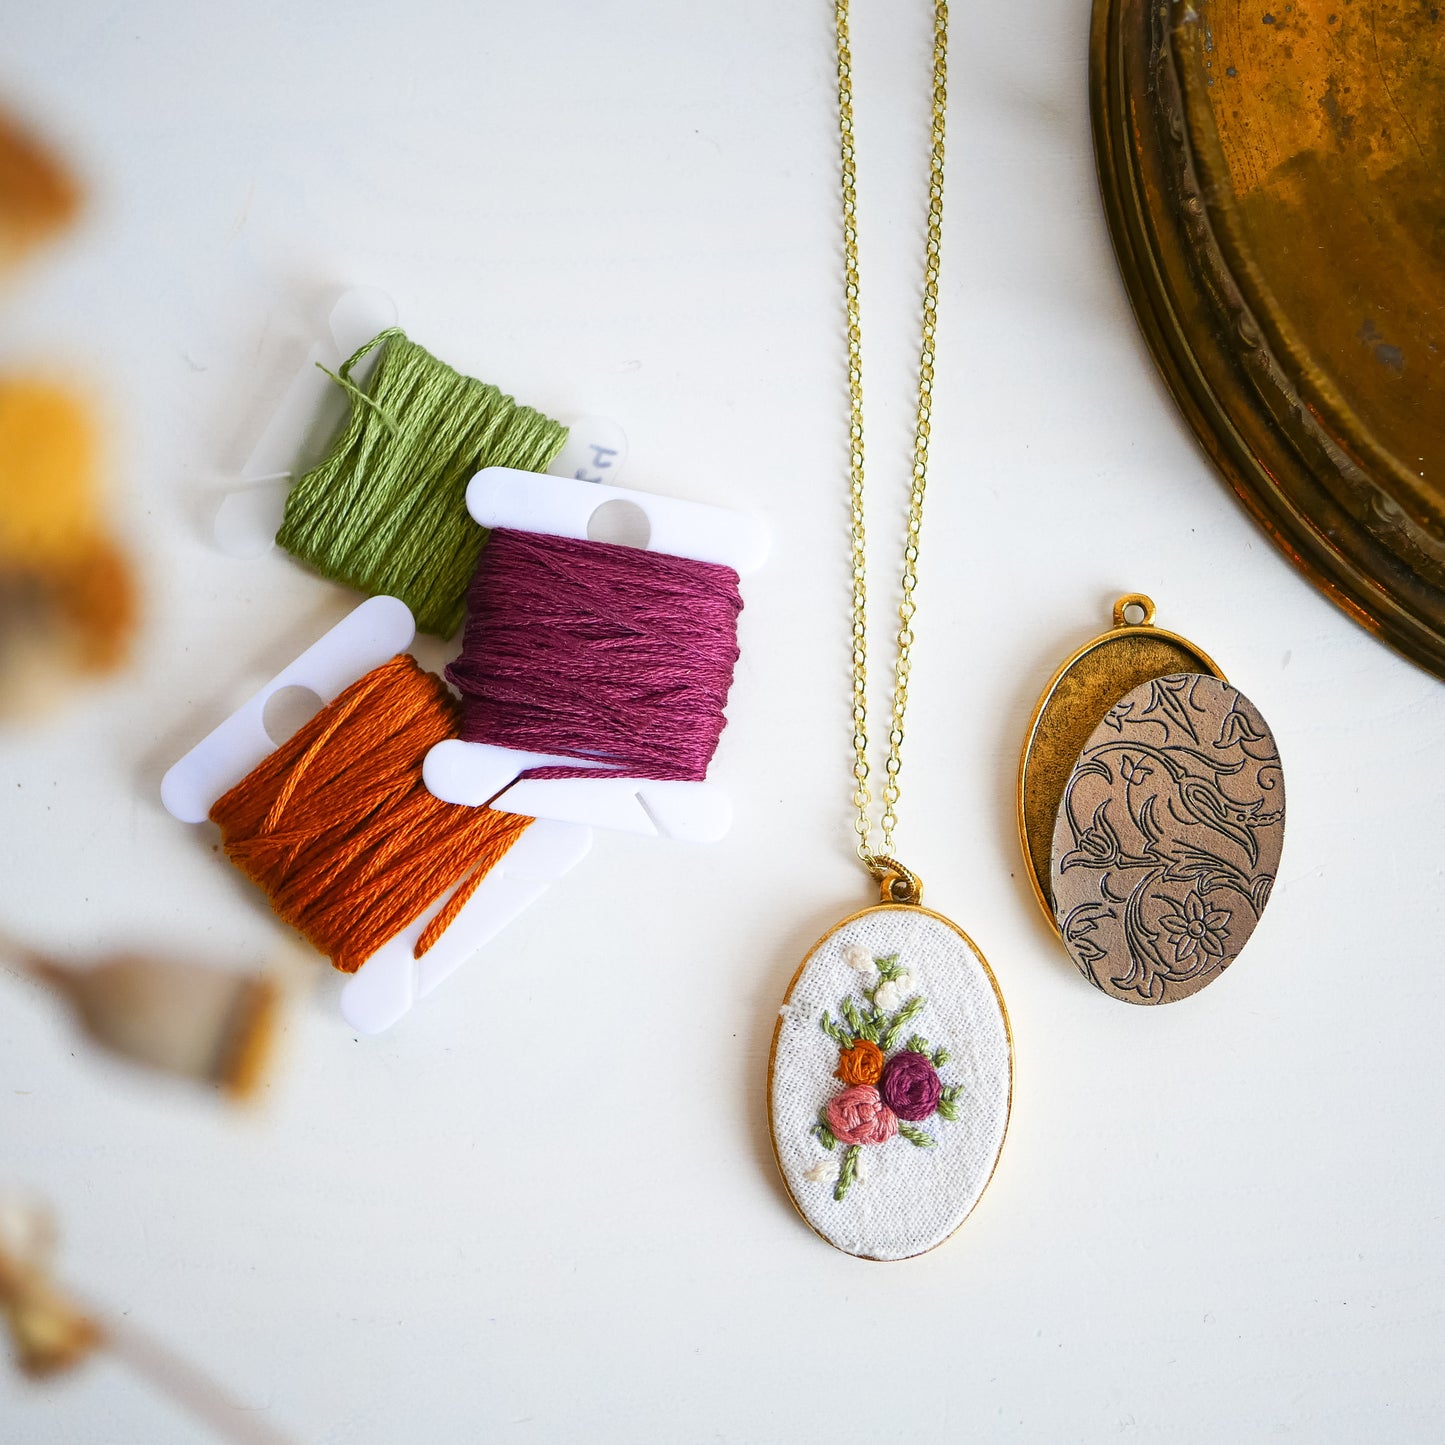 Embroidered Necklace Class - Tuesday April 16th 6-8pm